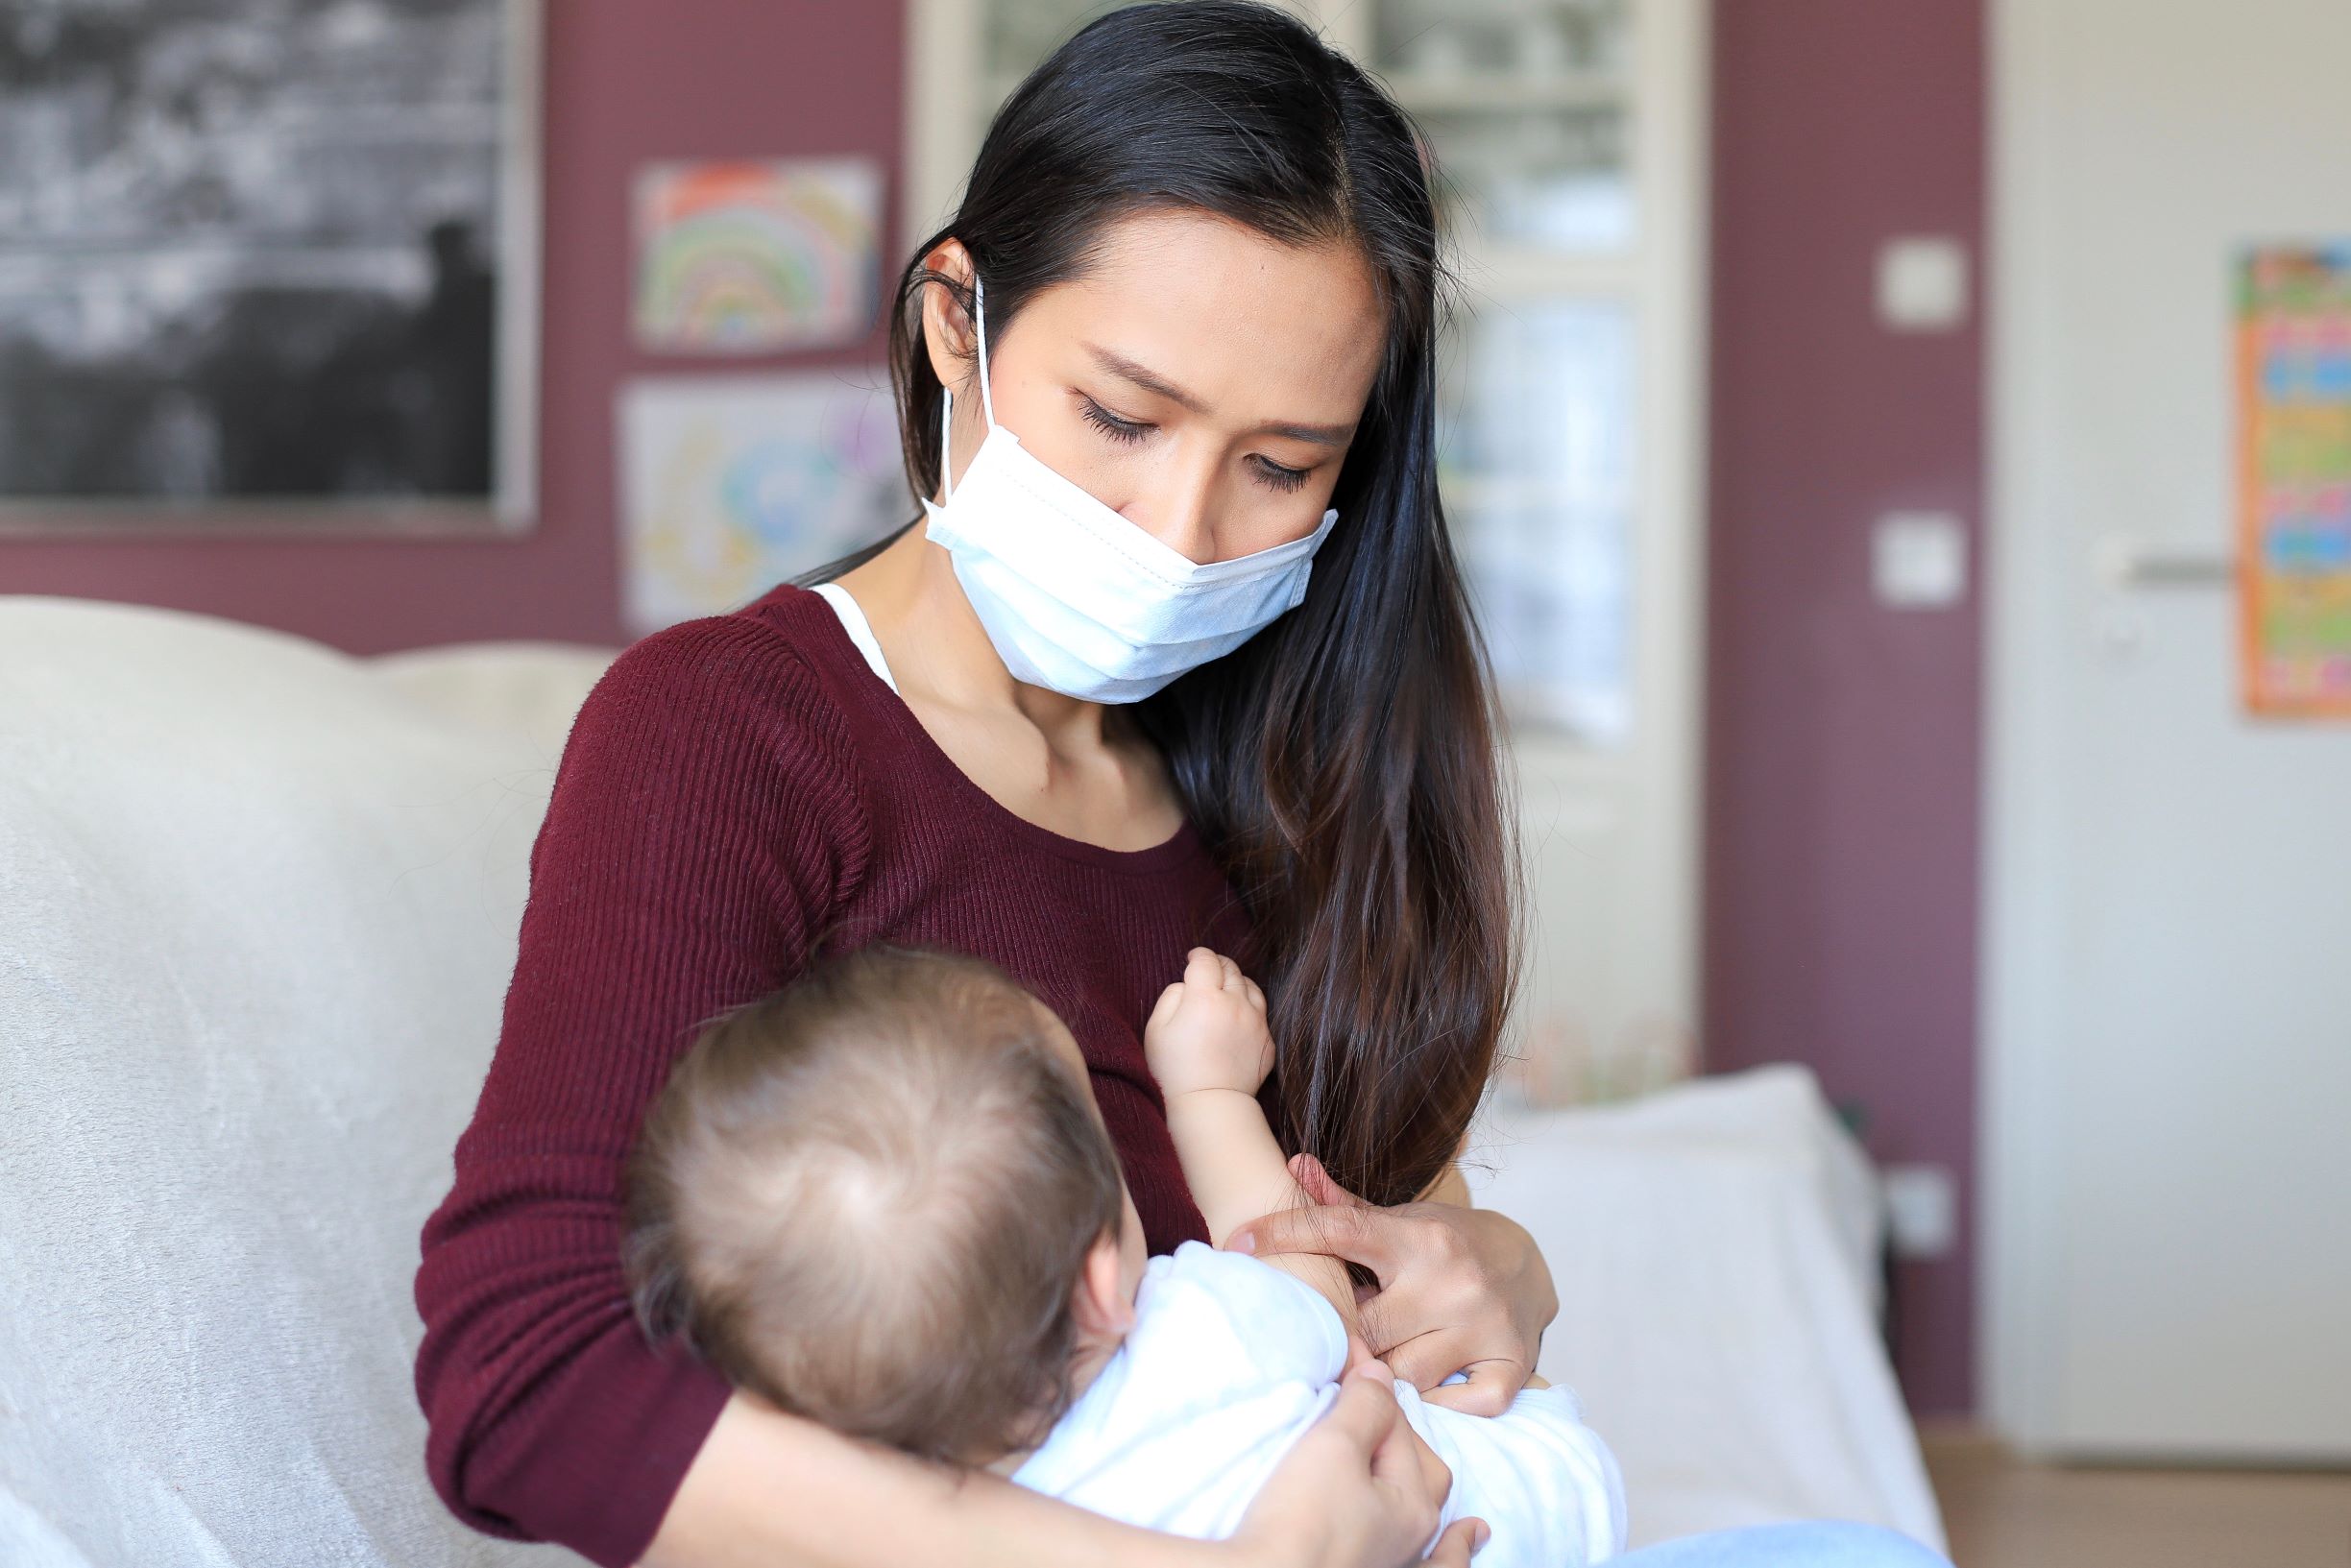 Breastfeeding appears safe for mothers with COVID-19, if they take precautions